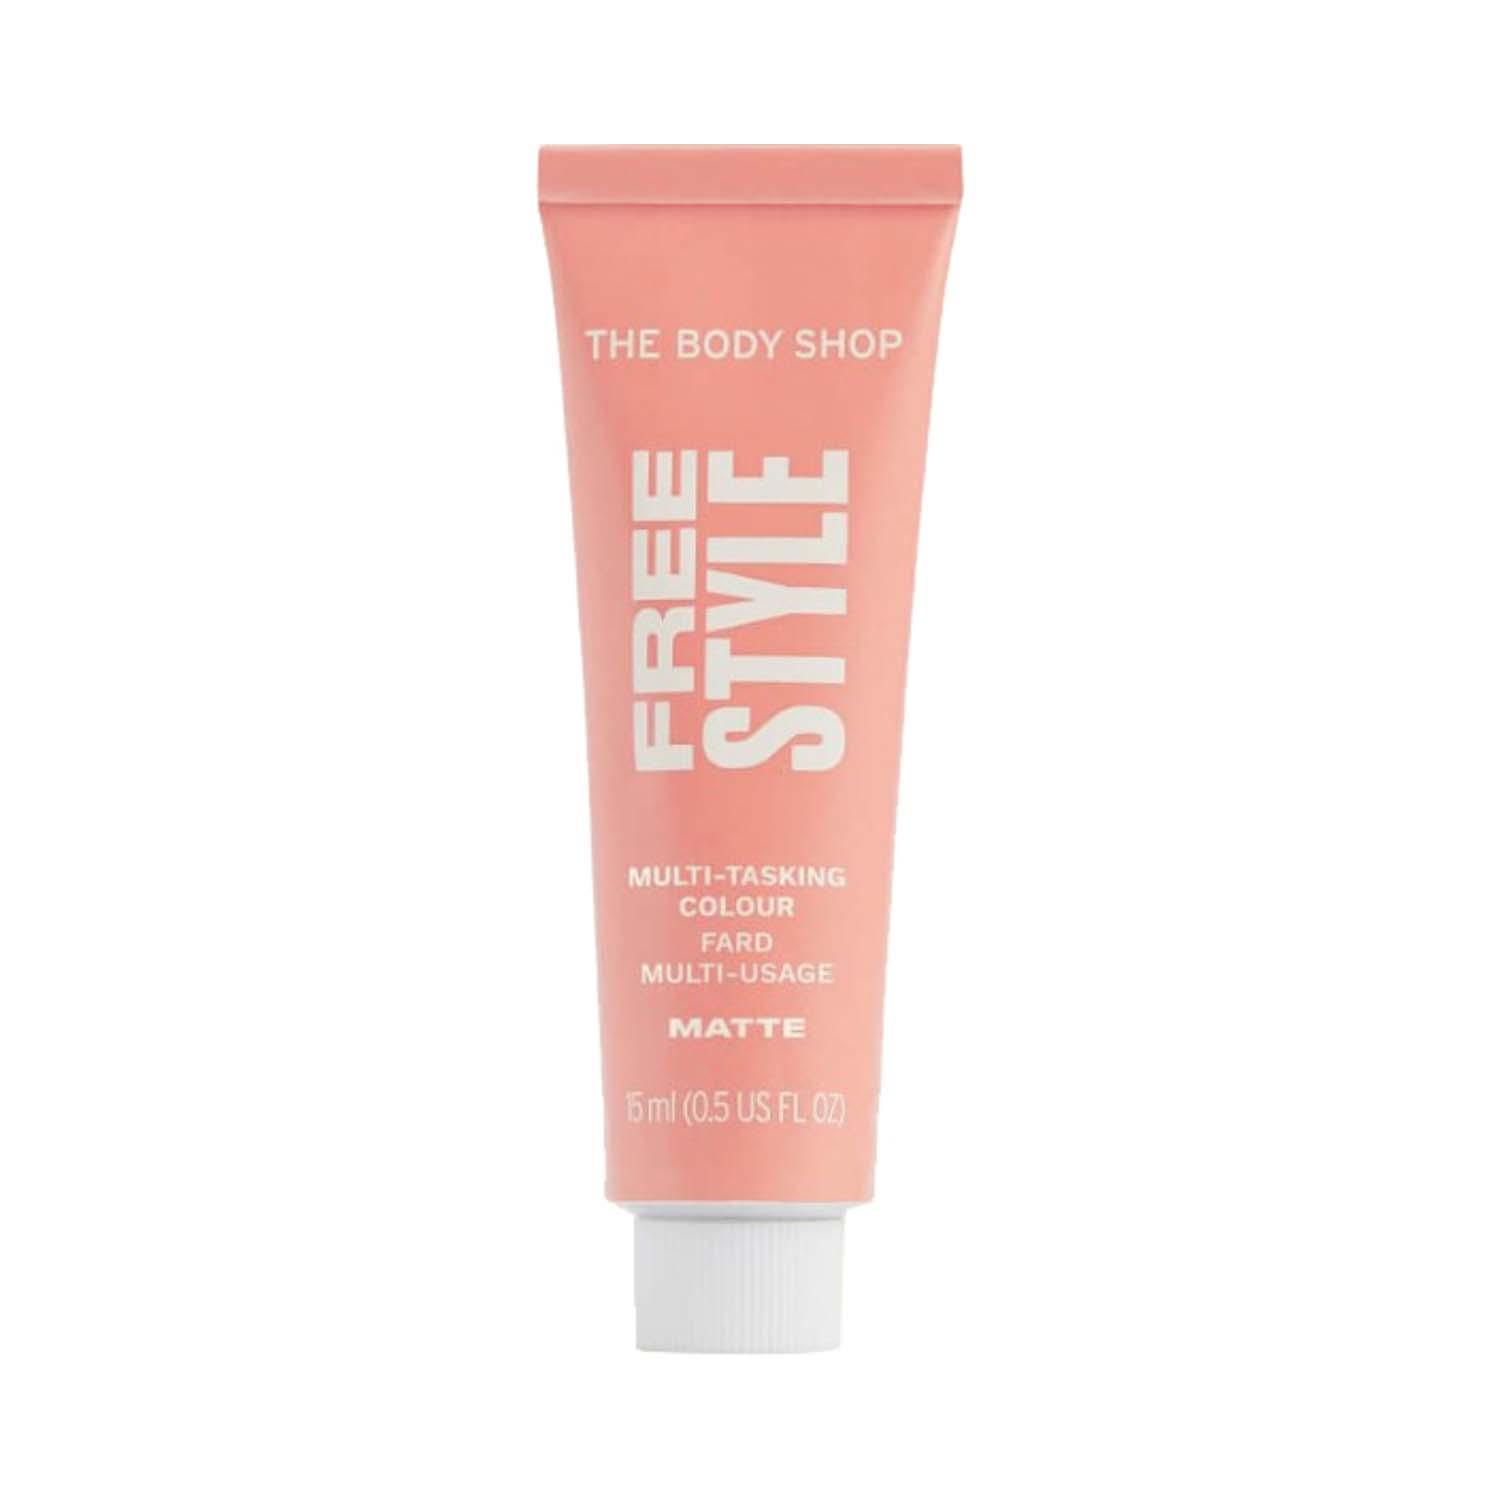 The Body Shop | The Body Shop Freestyle Multi Tasking Color - Fair (15 ml)